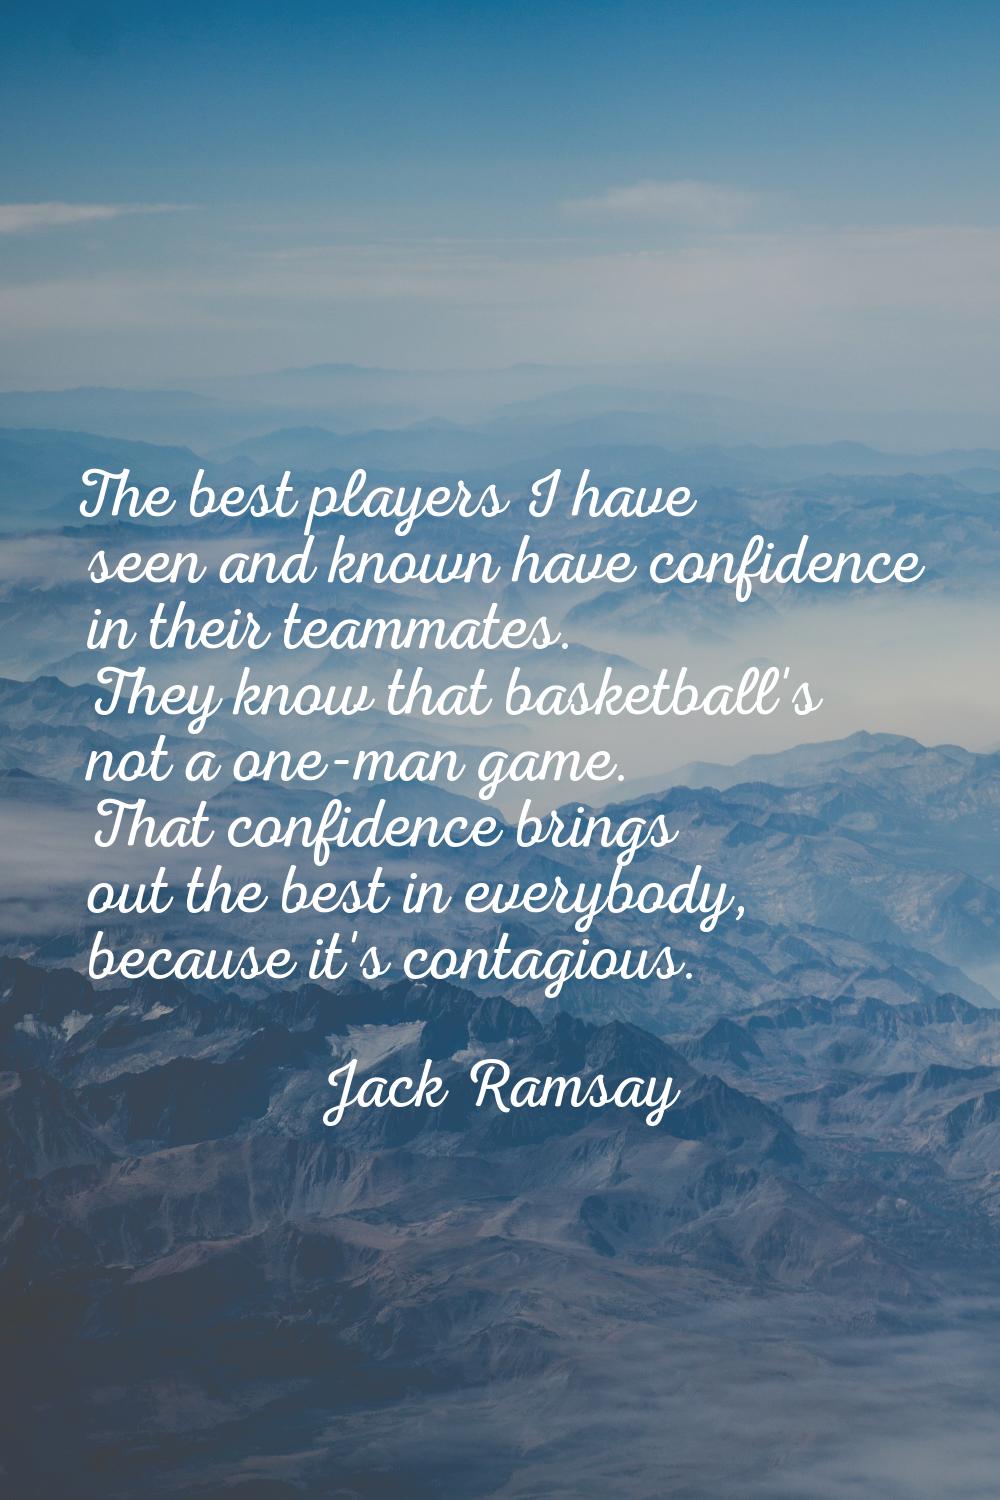 The best players I have seen and known have confidence in their teammates. They know that basketbal